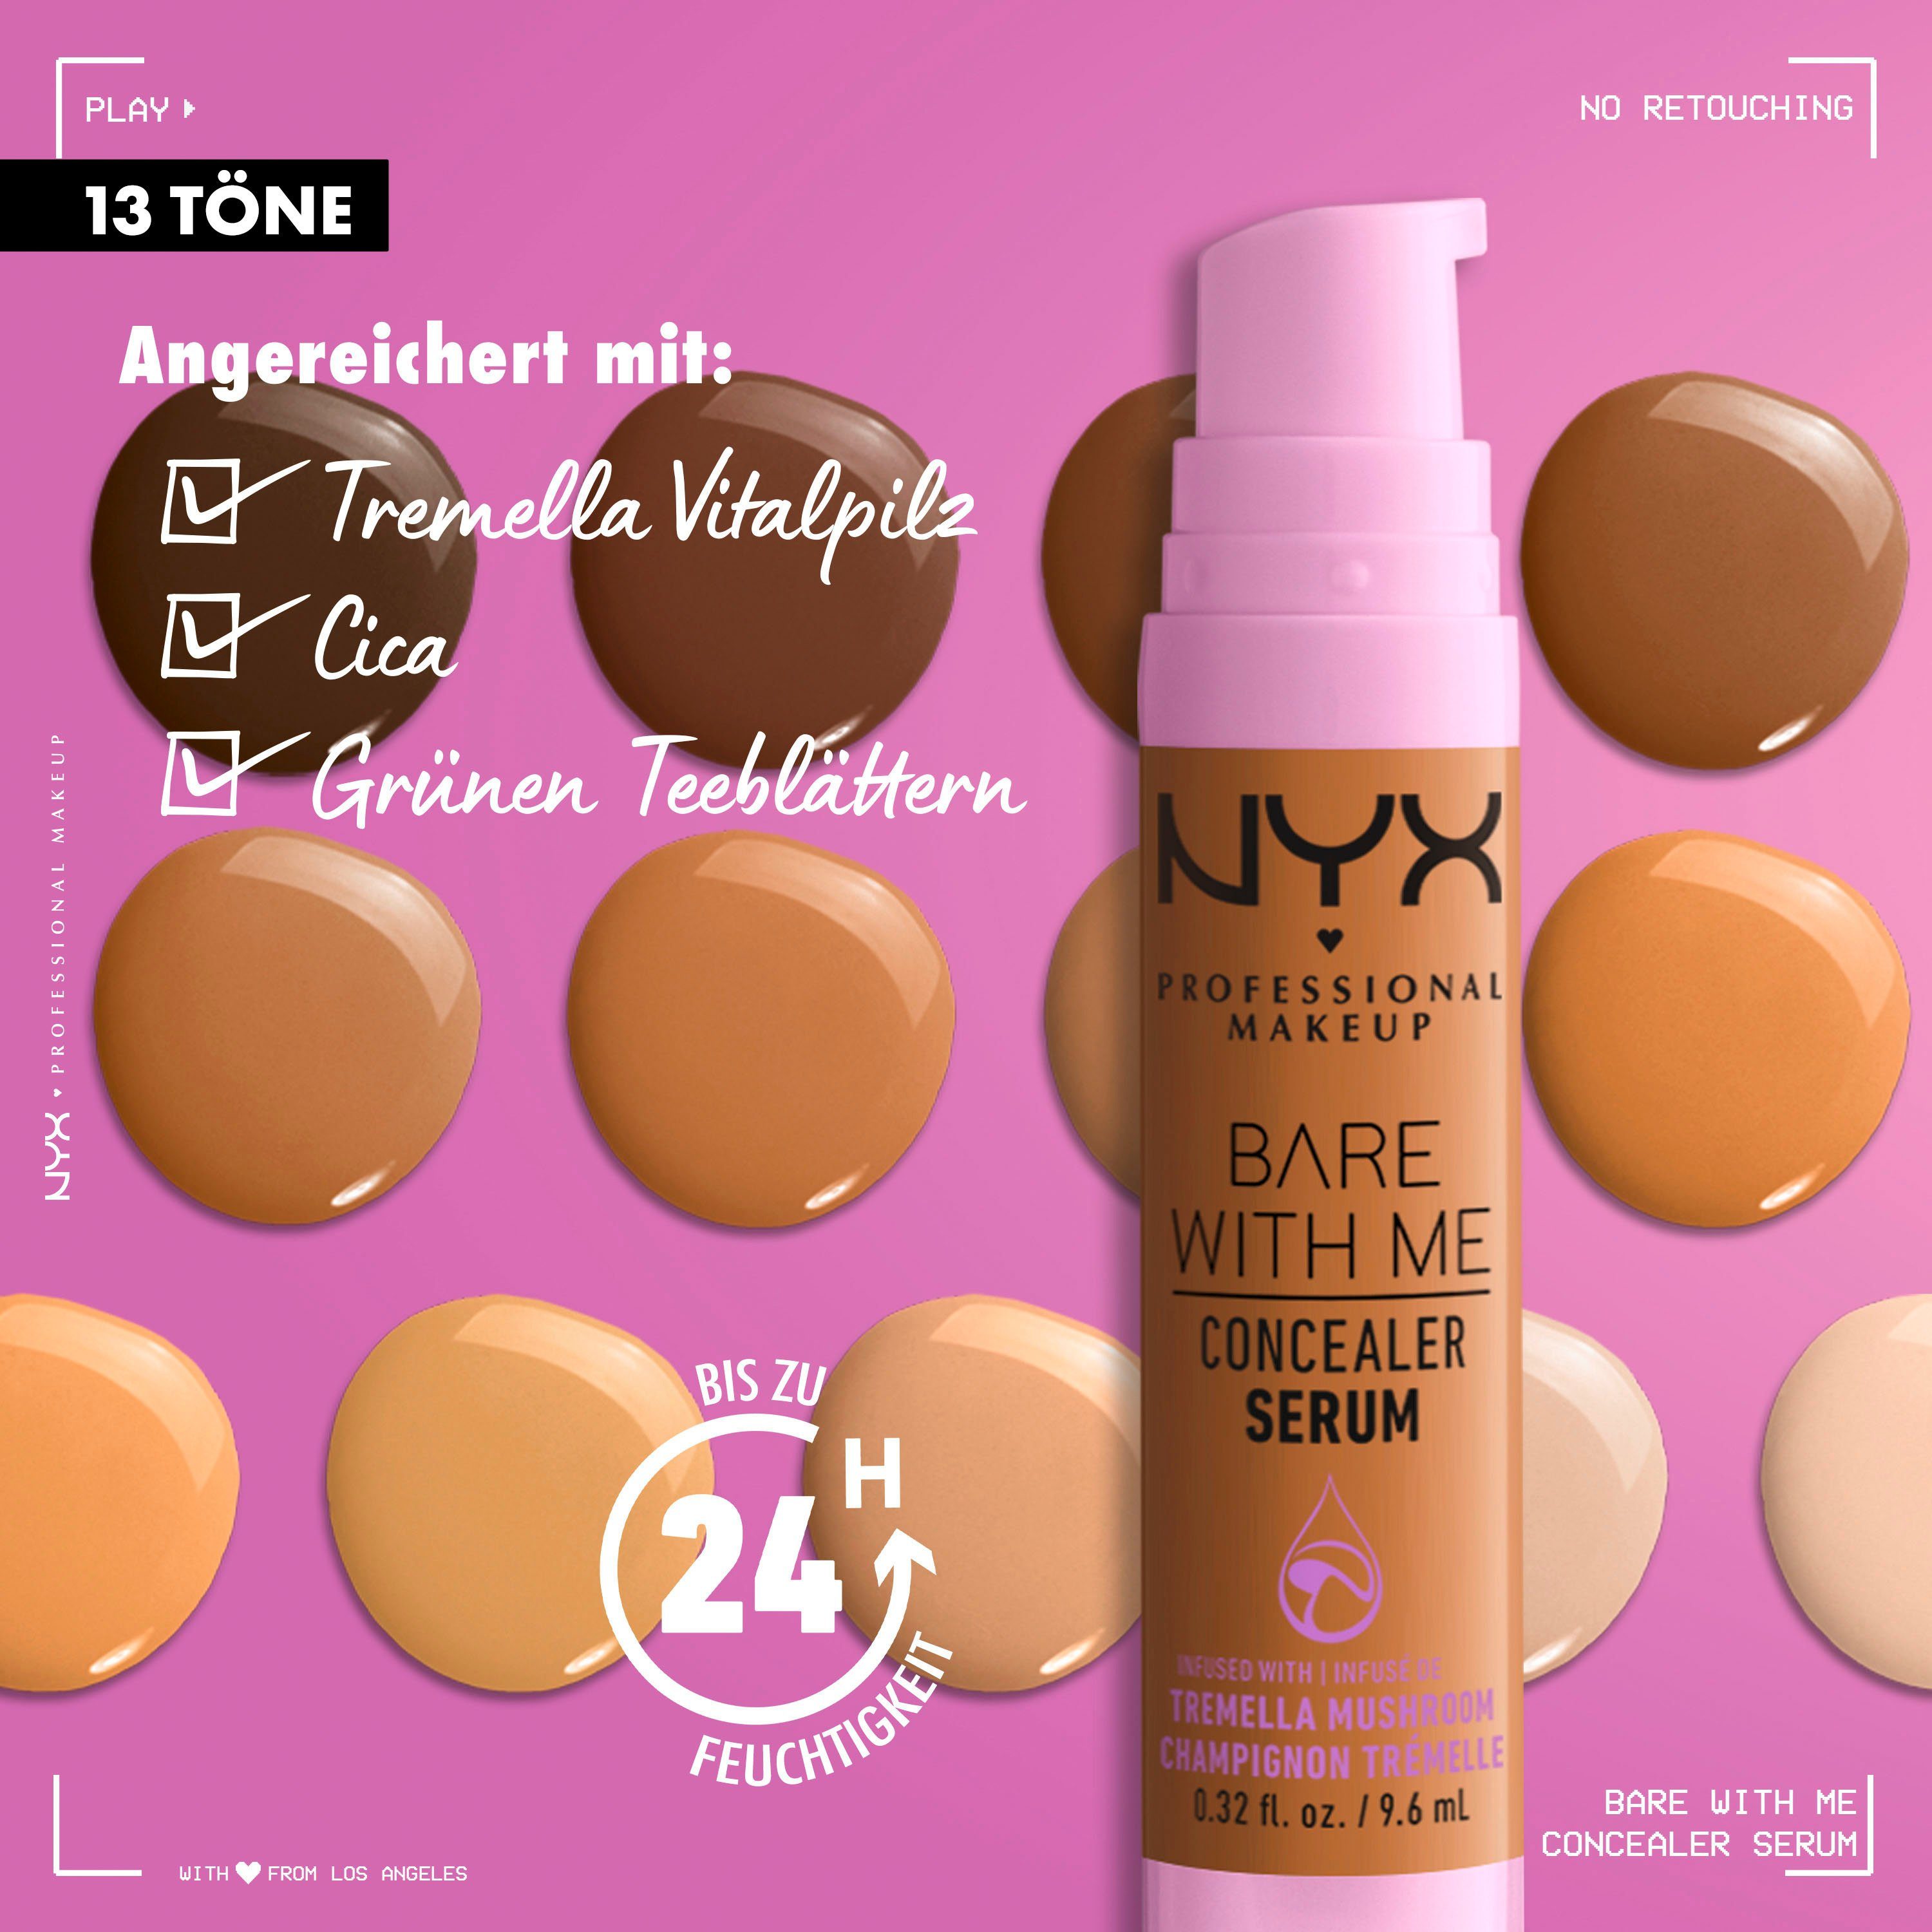 NYX Concealer Bare Serum Me With Concealer